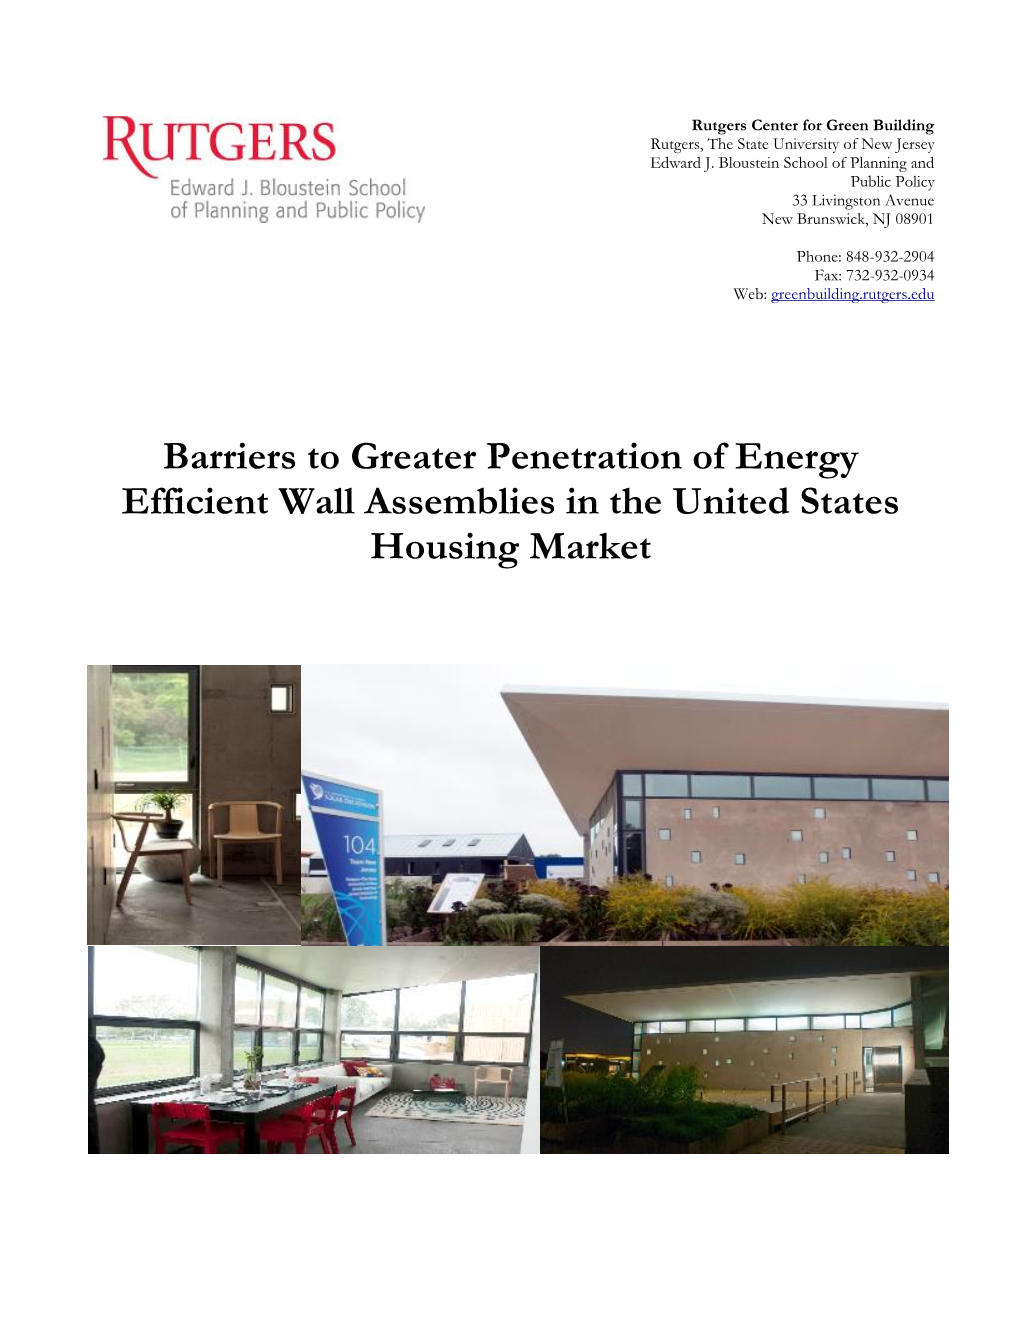 Barriers to Greater Penetration of Energy Efficient Wall Assemblies in the United States Housing Market